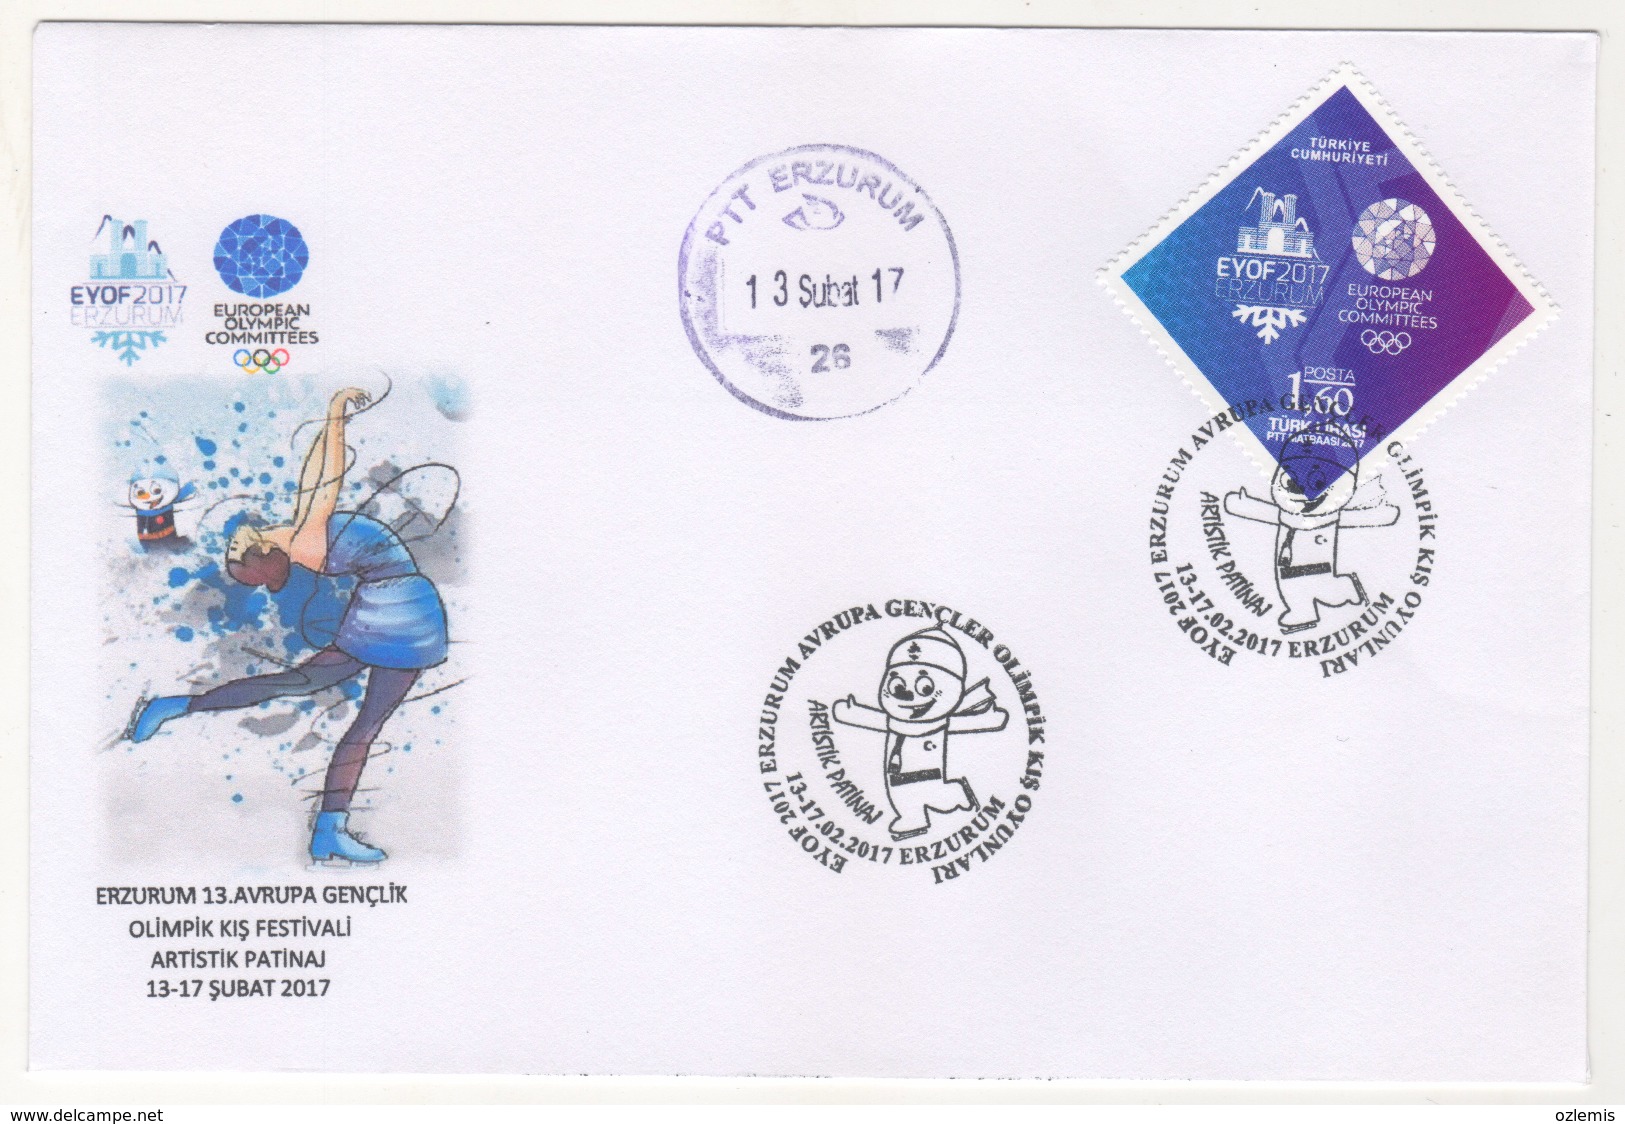 EYOF 2017 ERZURUM EUROPEAN YOUTH OLYMPIC WINTER FESTIVAL FIRST DAY  COVER - Briefe U. Dokumente